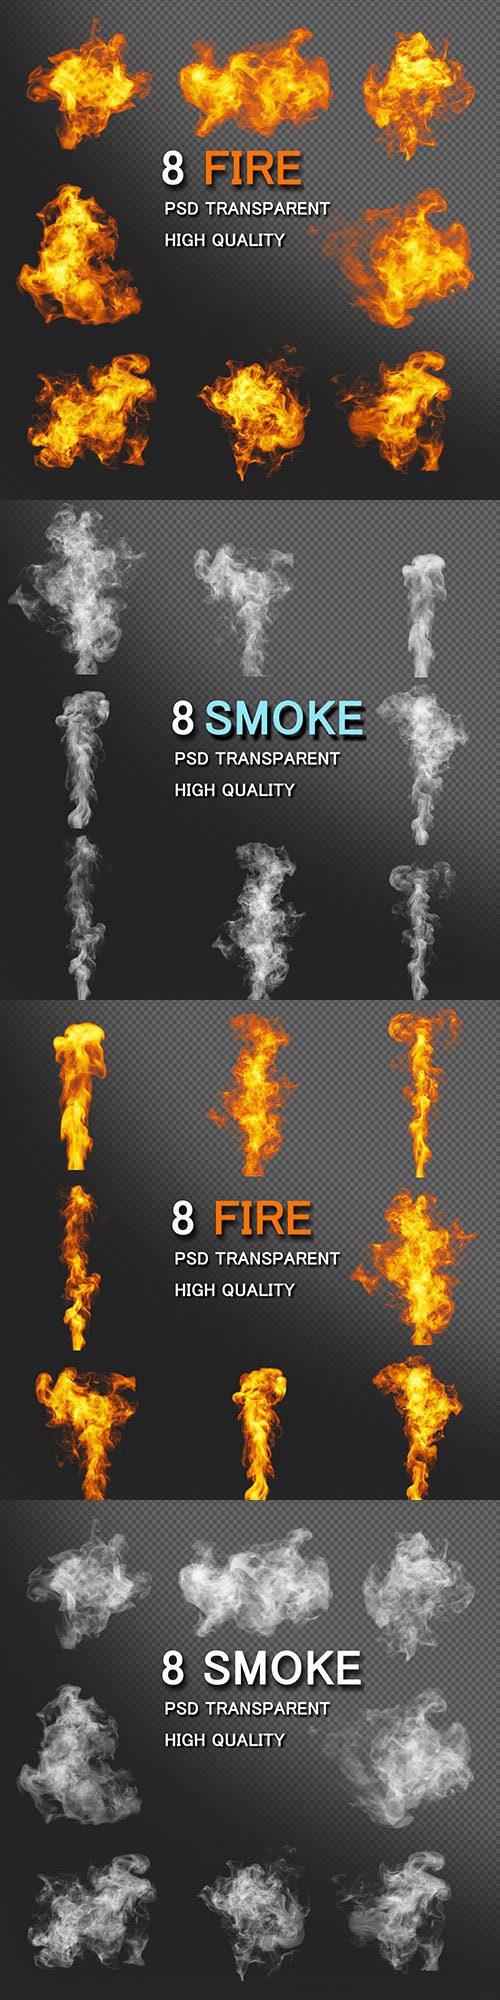 Smoke and fire elements transparent background